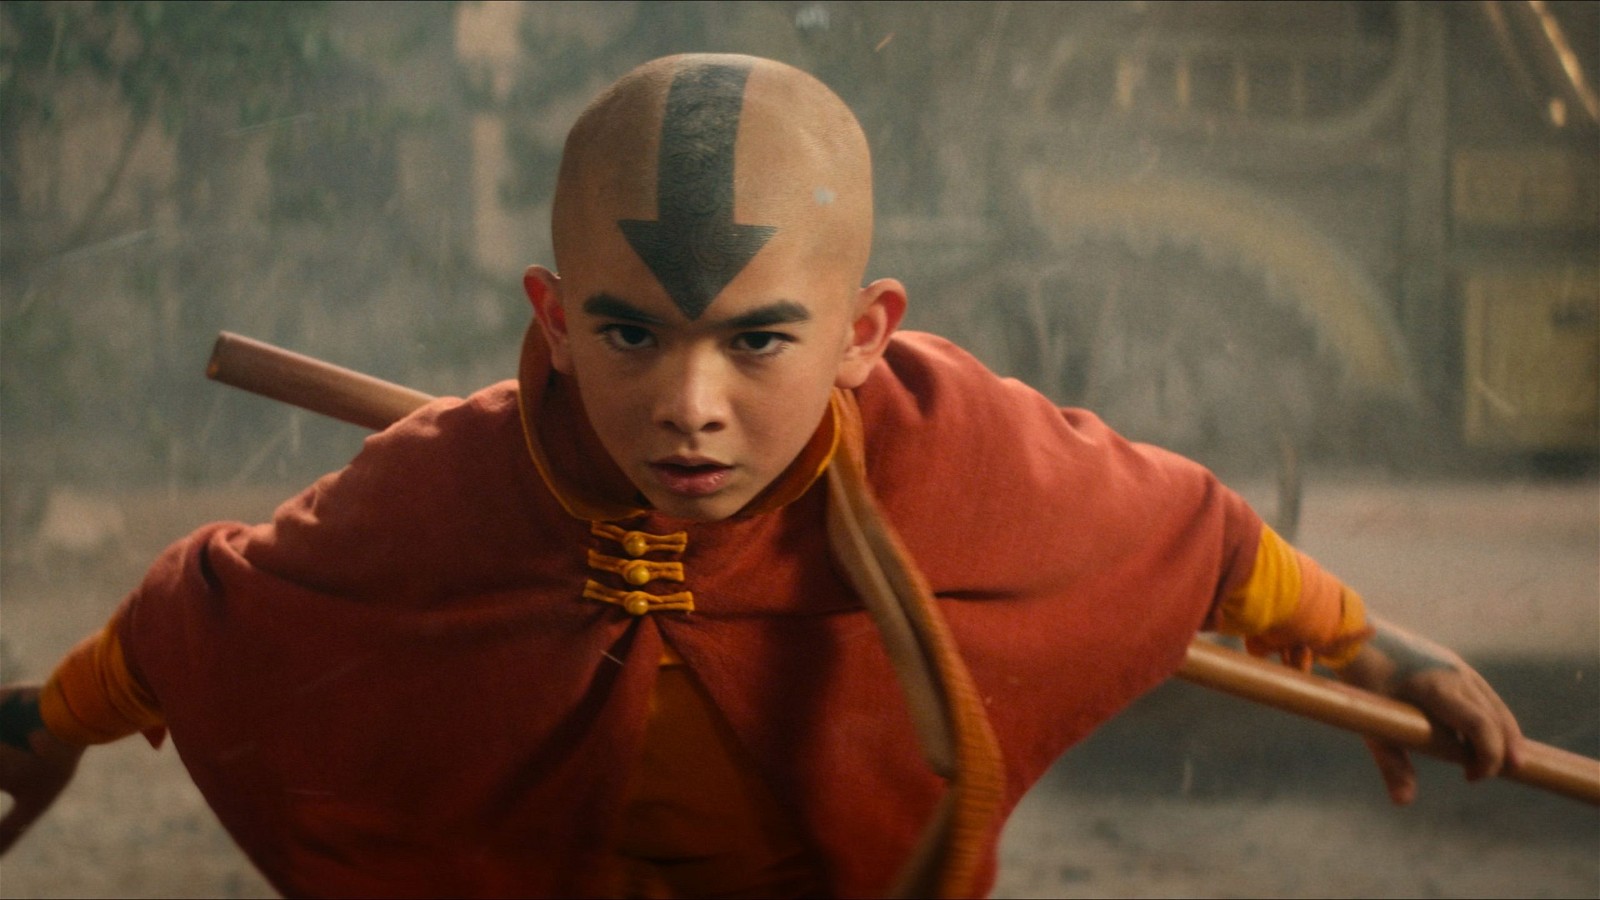 Fans were not happy with varius narrative choices of Netflix's A still from Netflix's Avatar: The Last Airbender